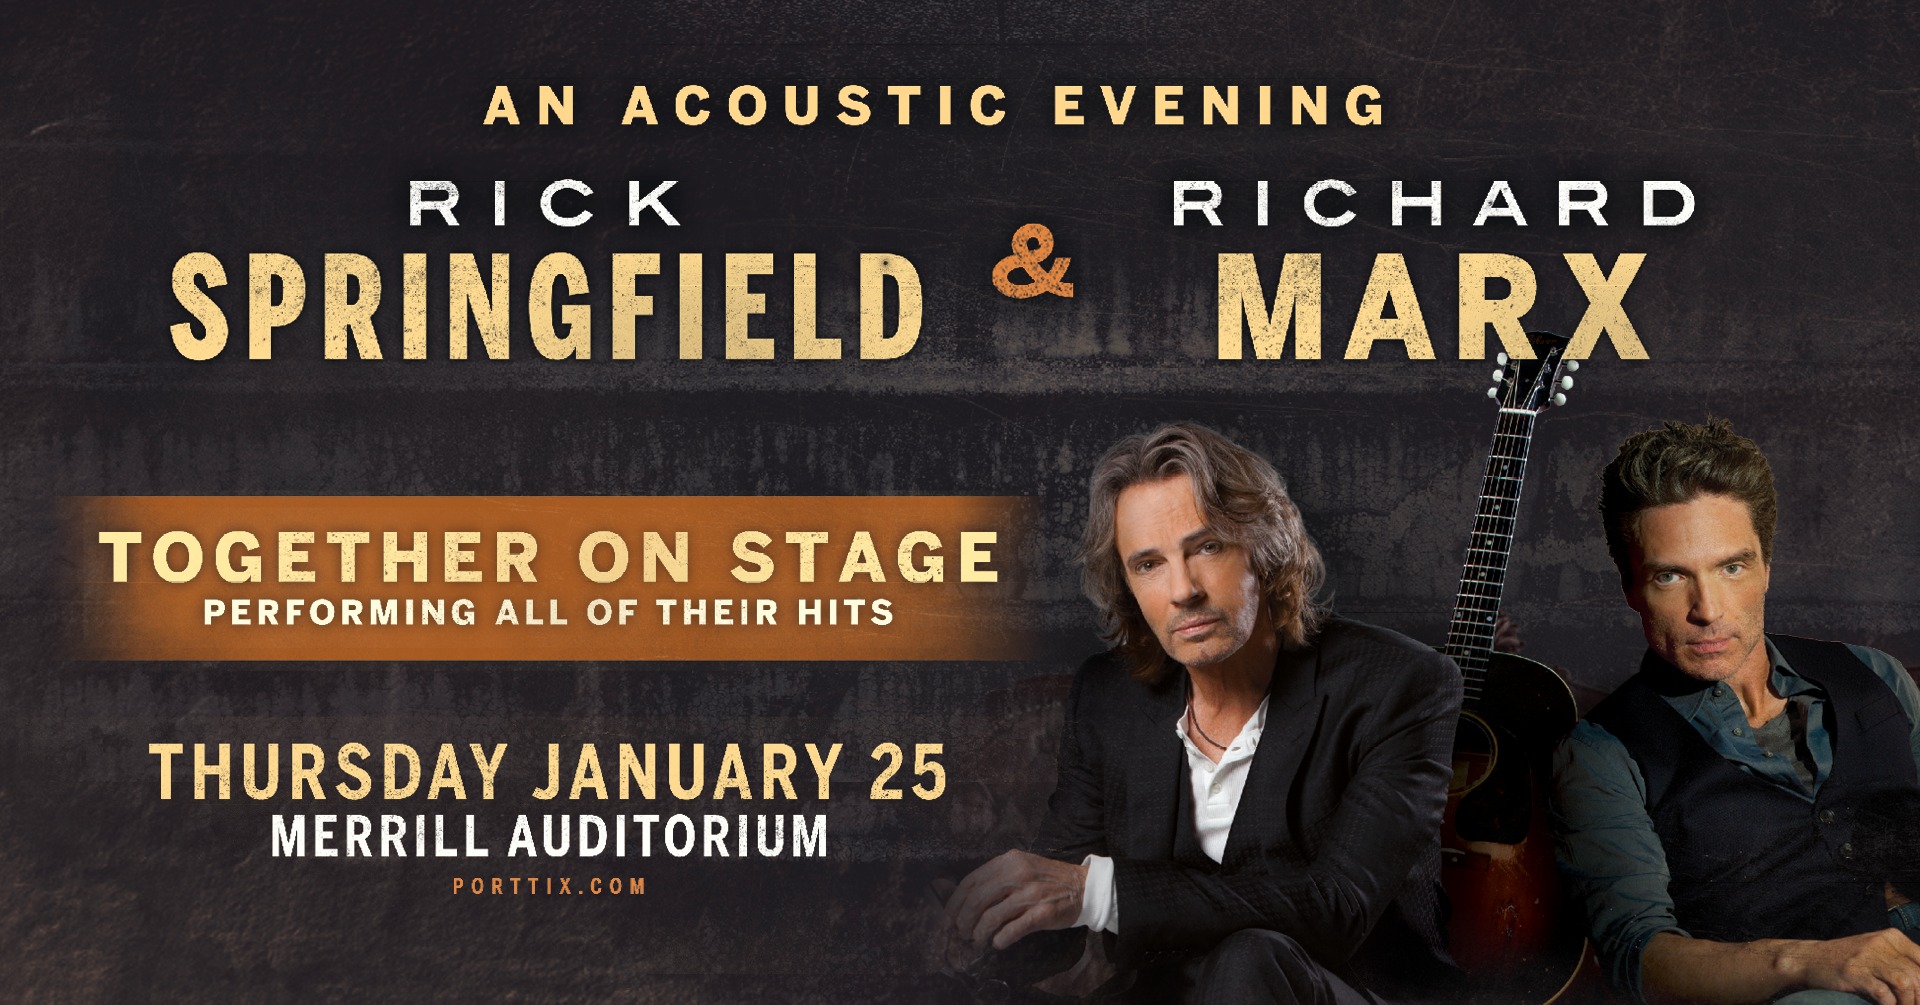 Win Tickets to See Rick Springfield and Richard Marx!